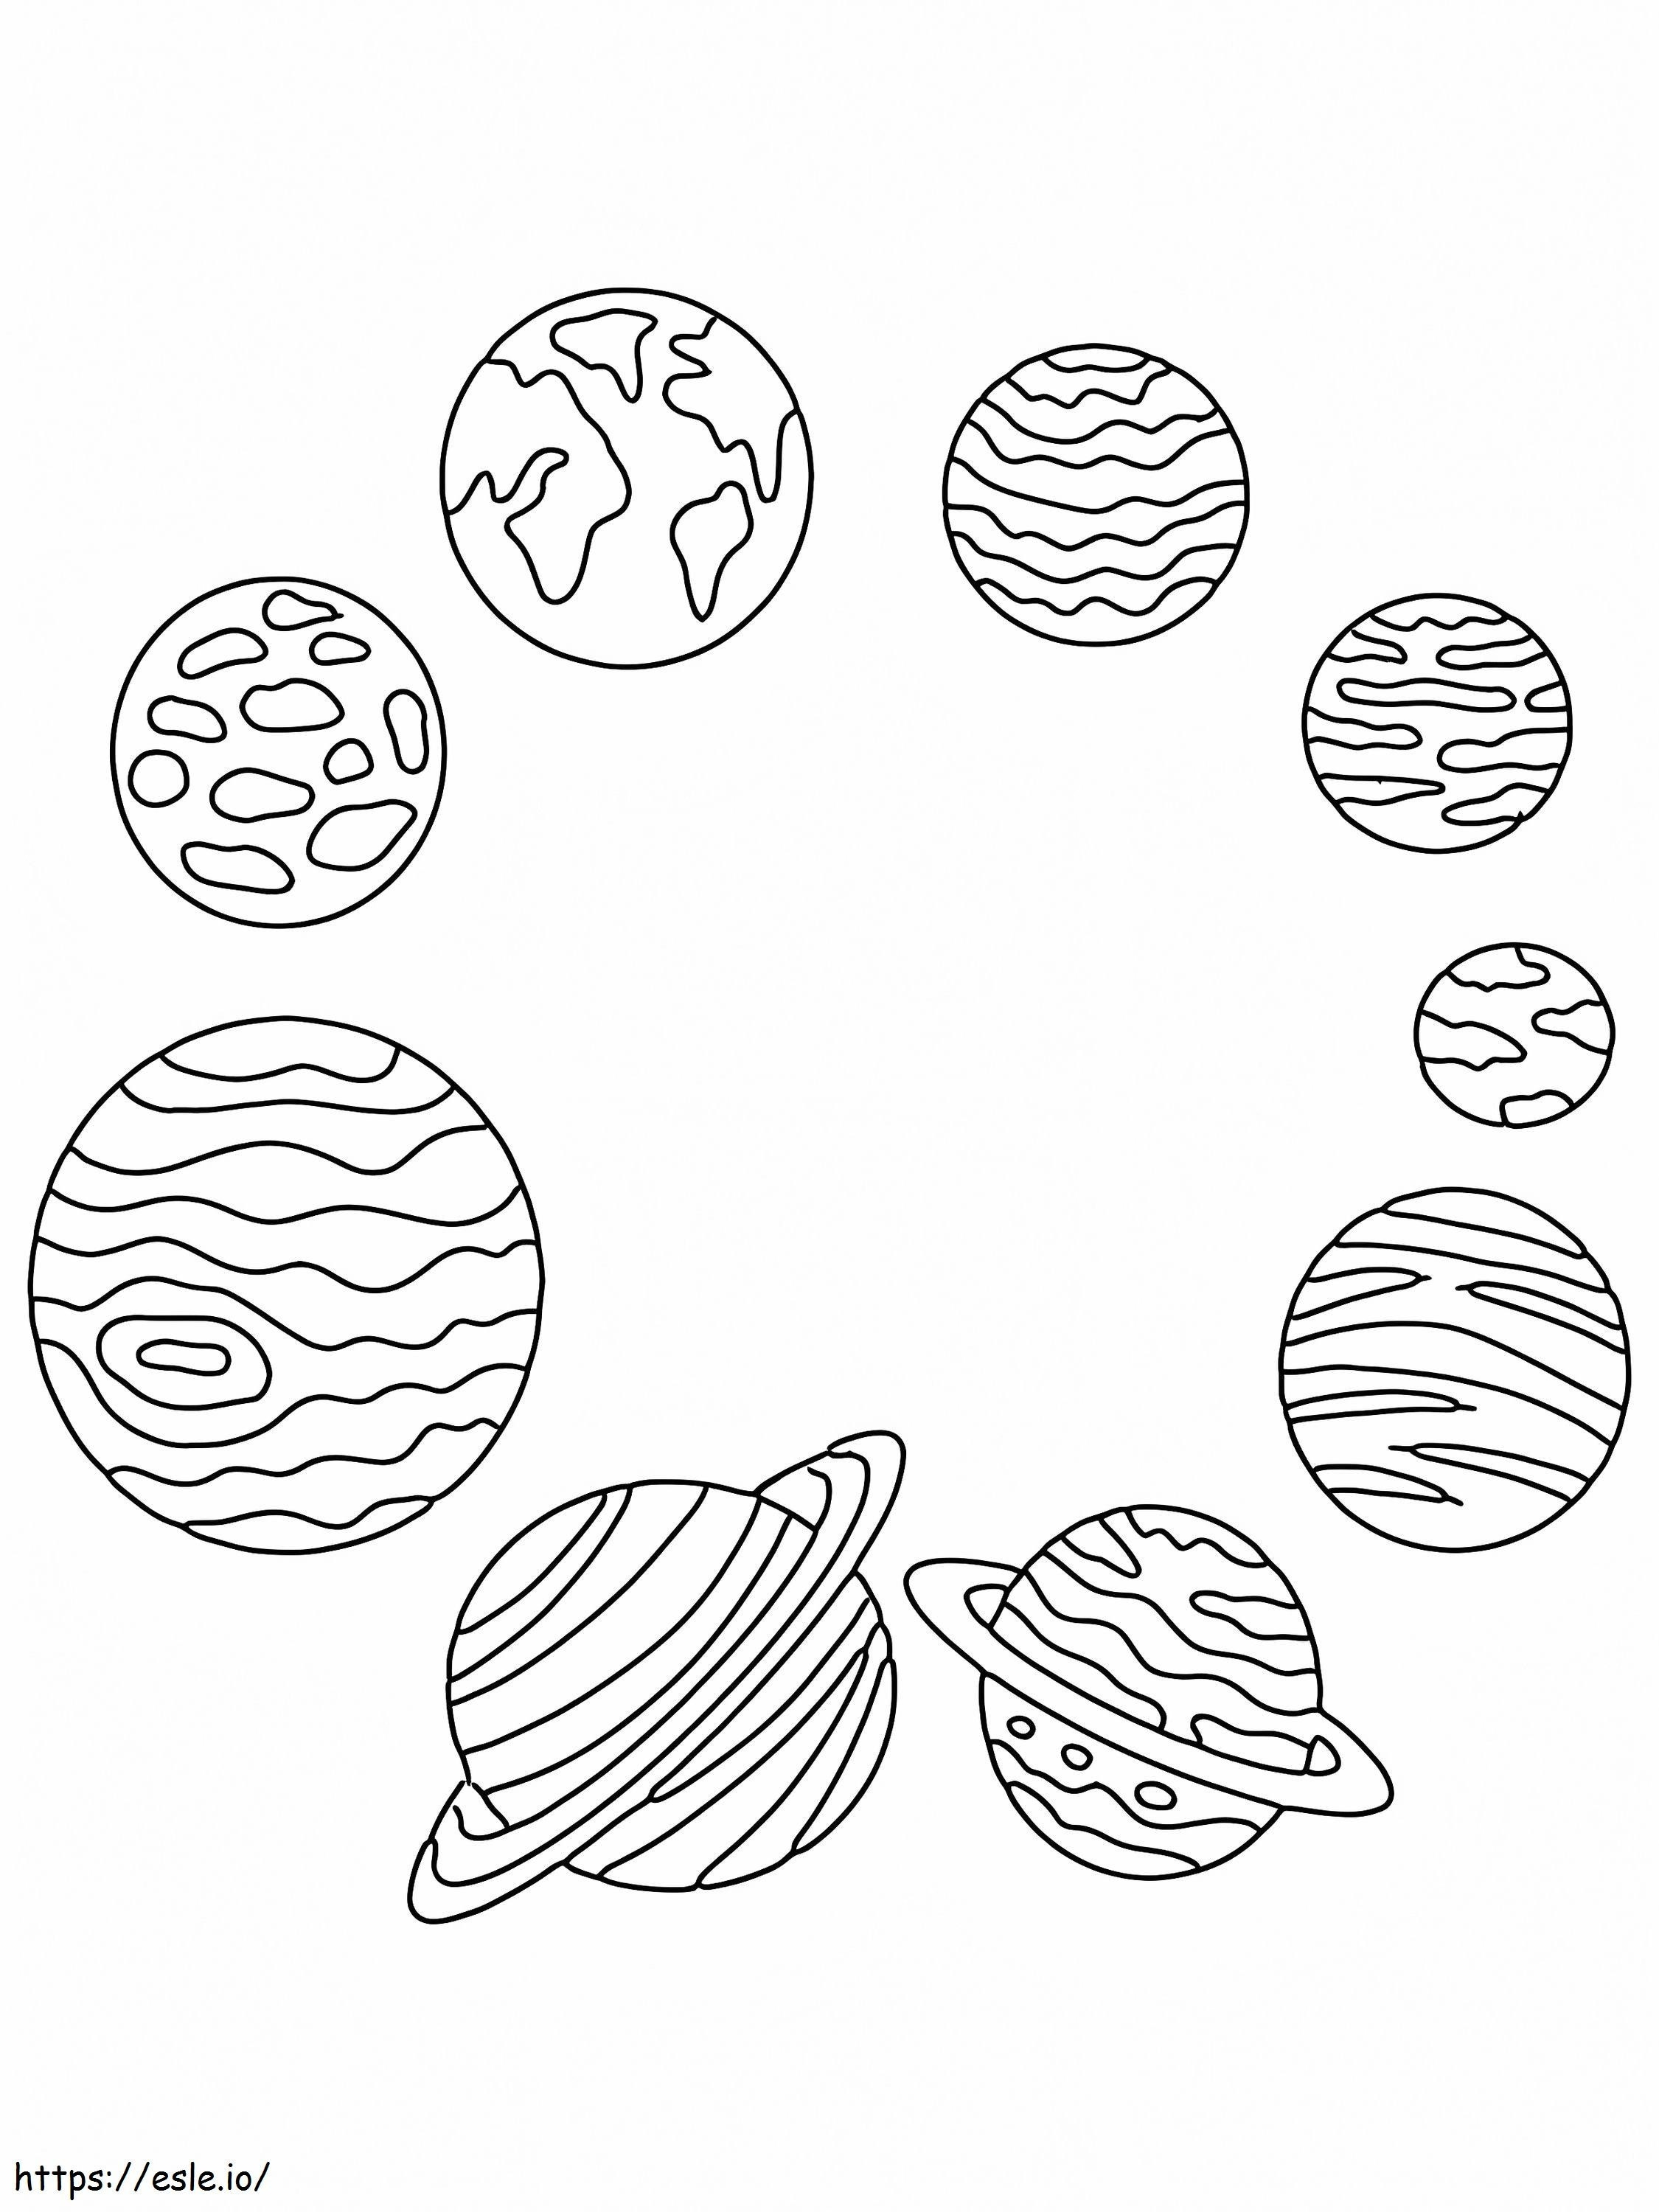 All Planets coloring page